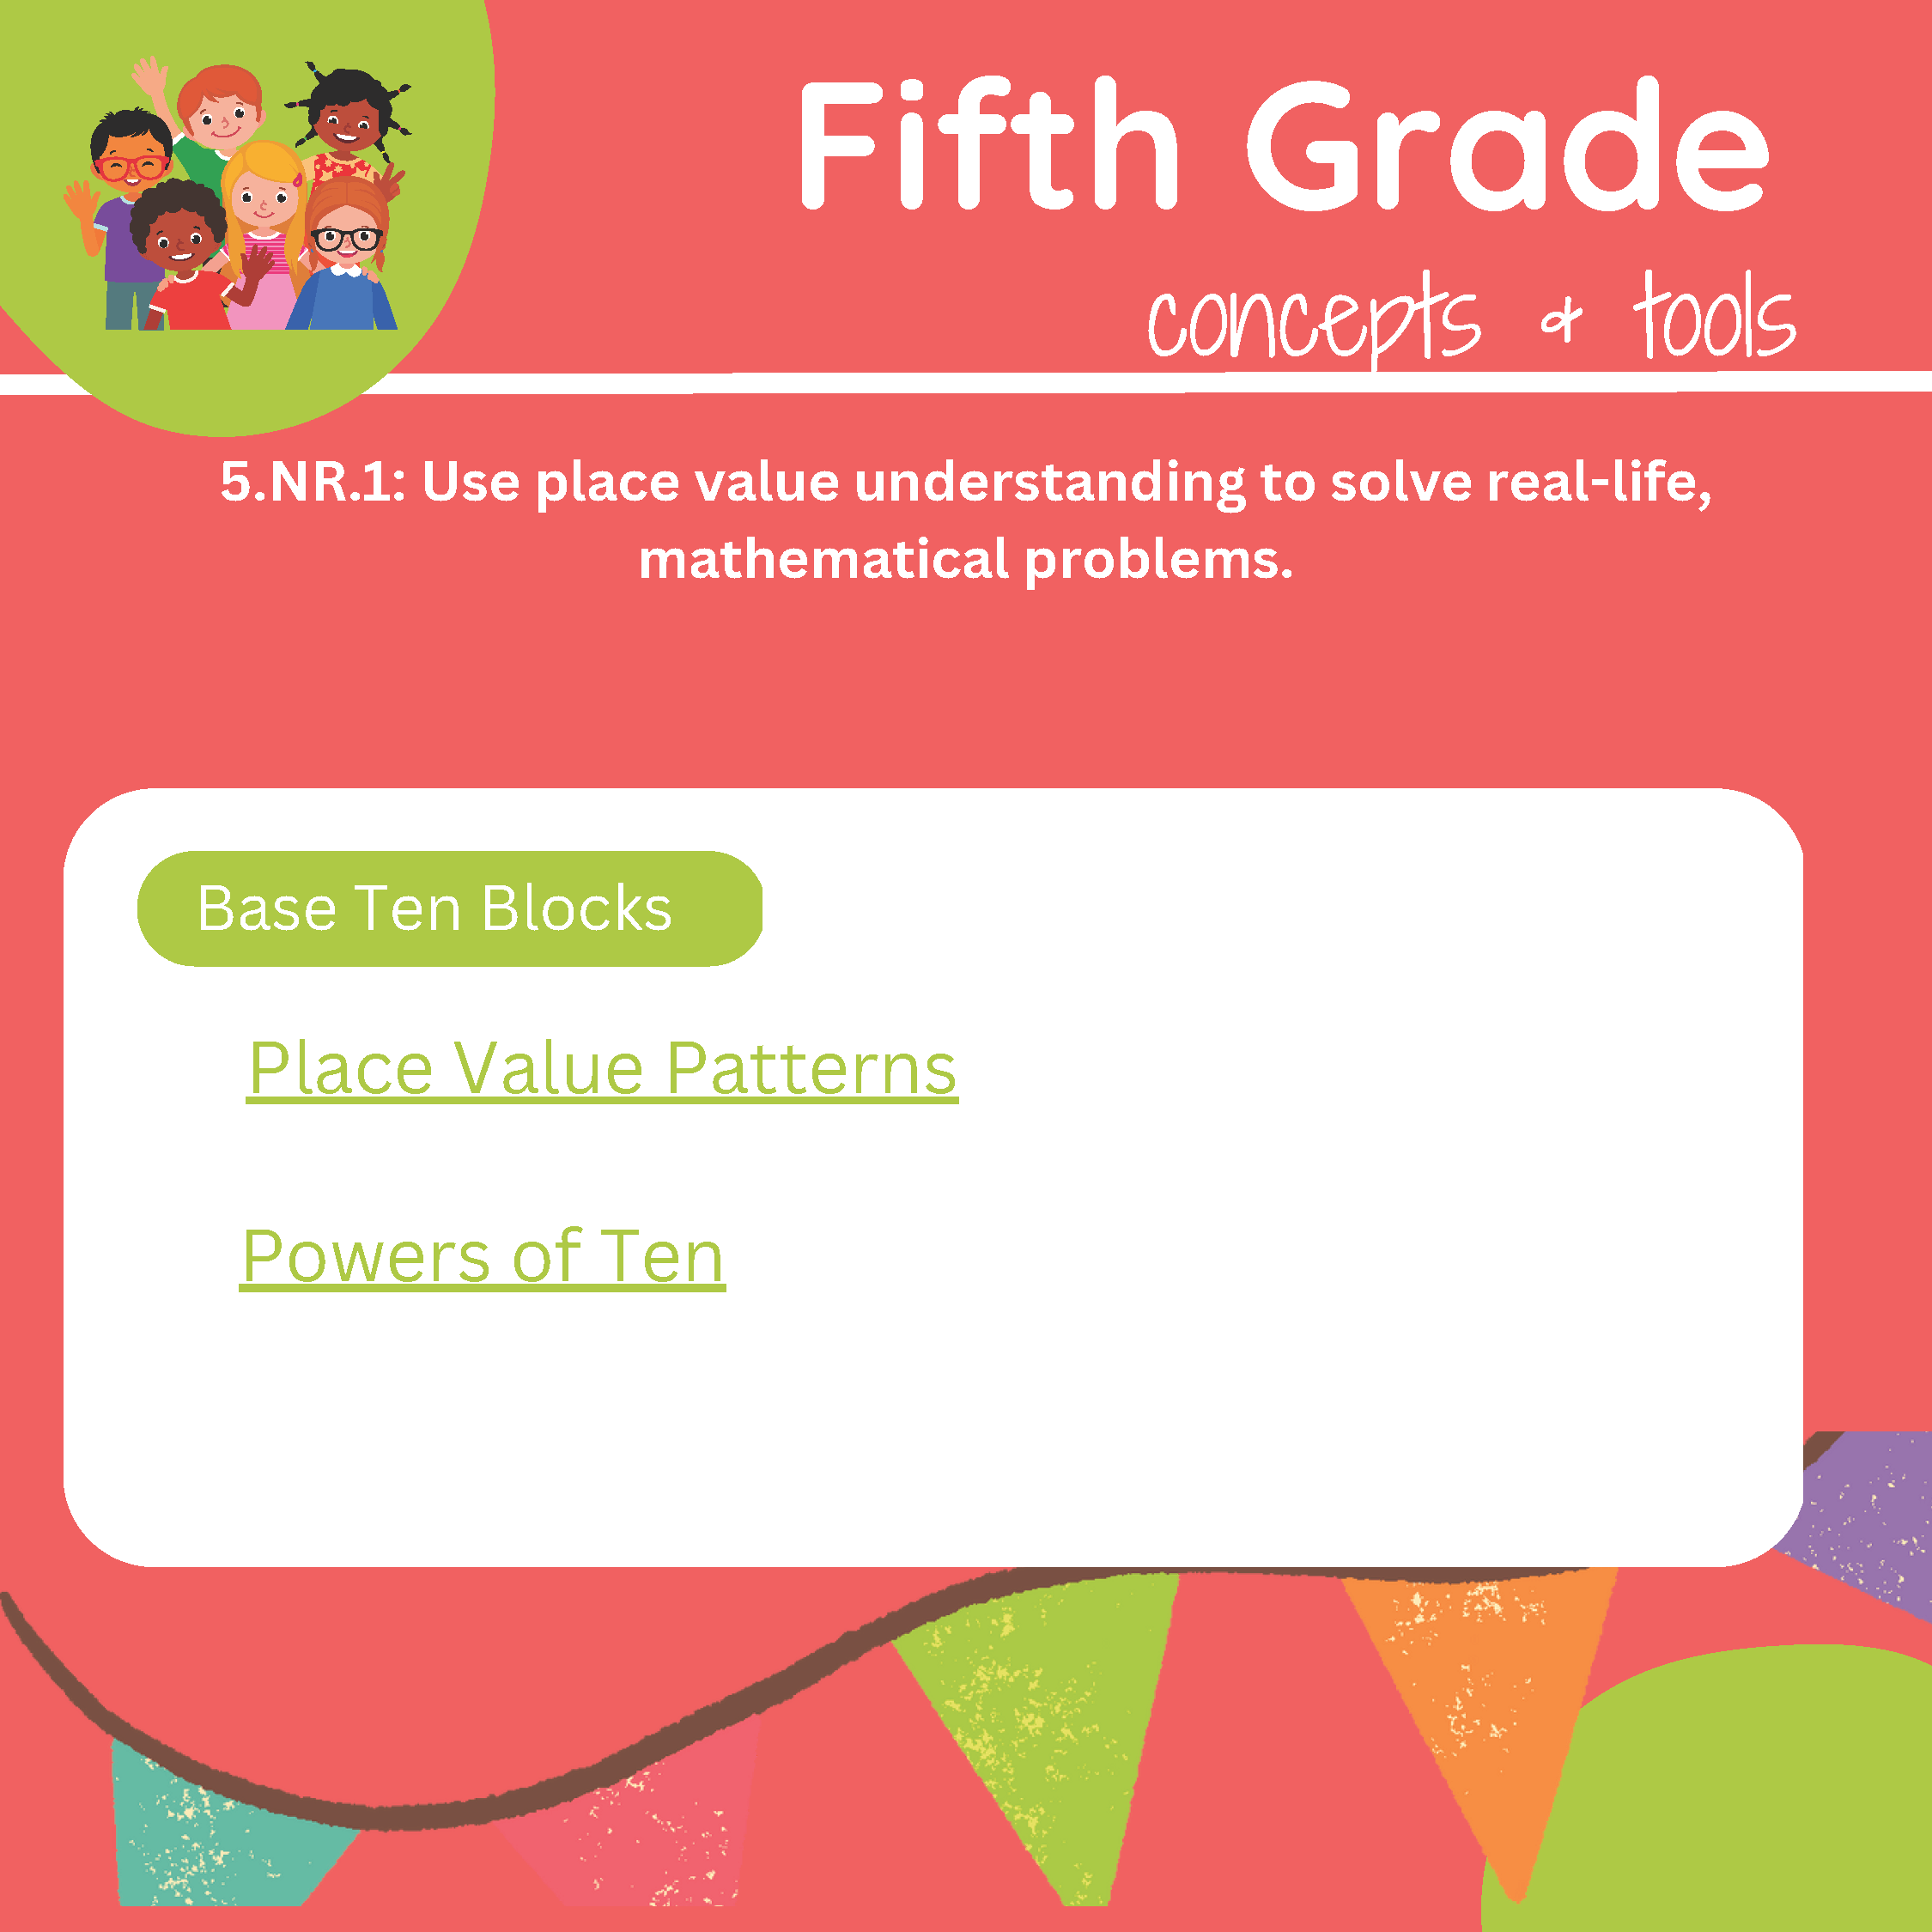 Fifth Grade concepts and tools_Page_1